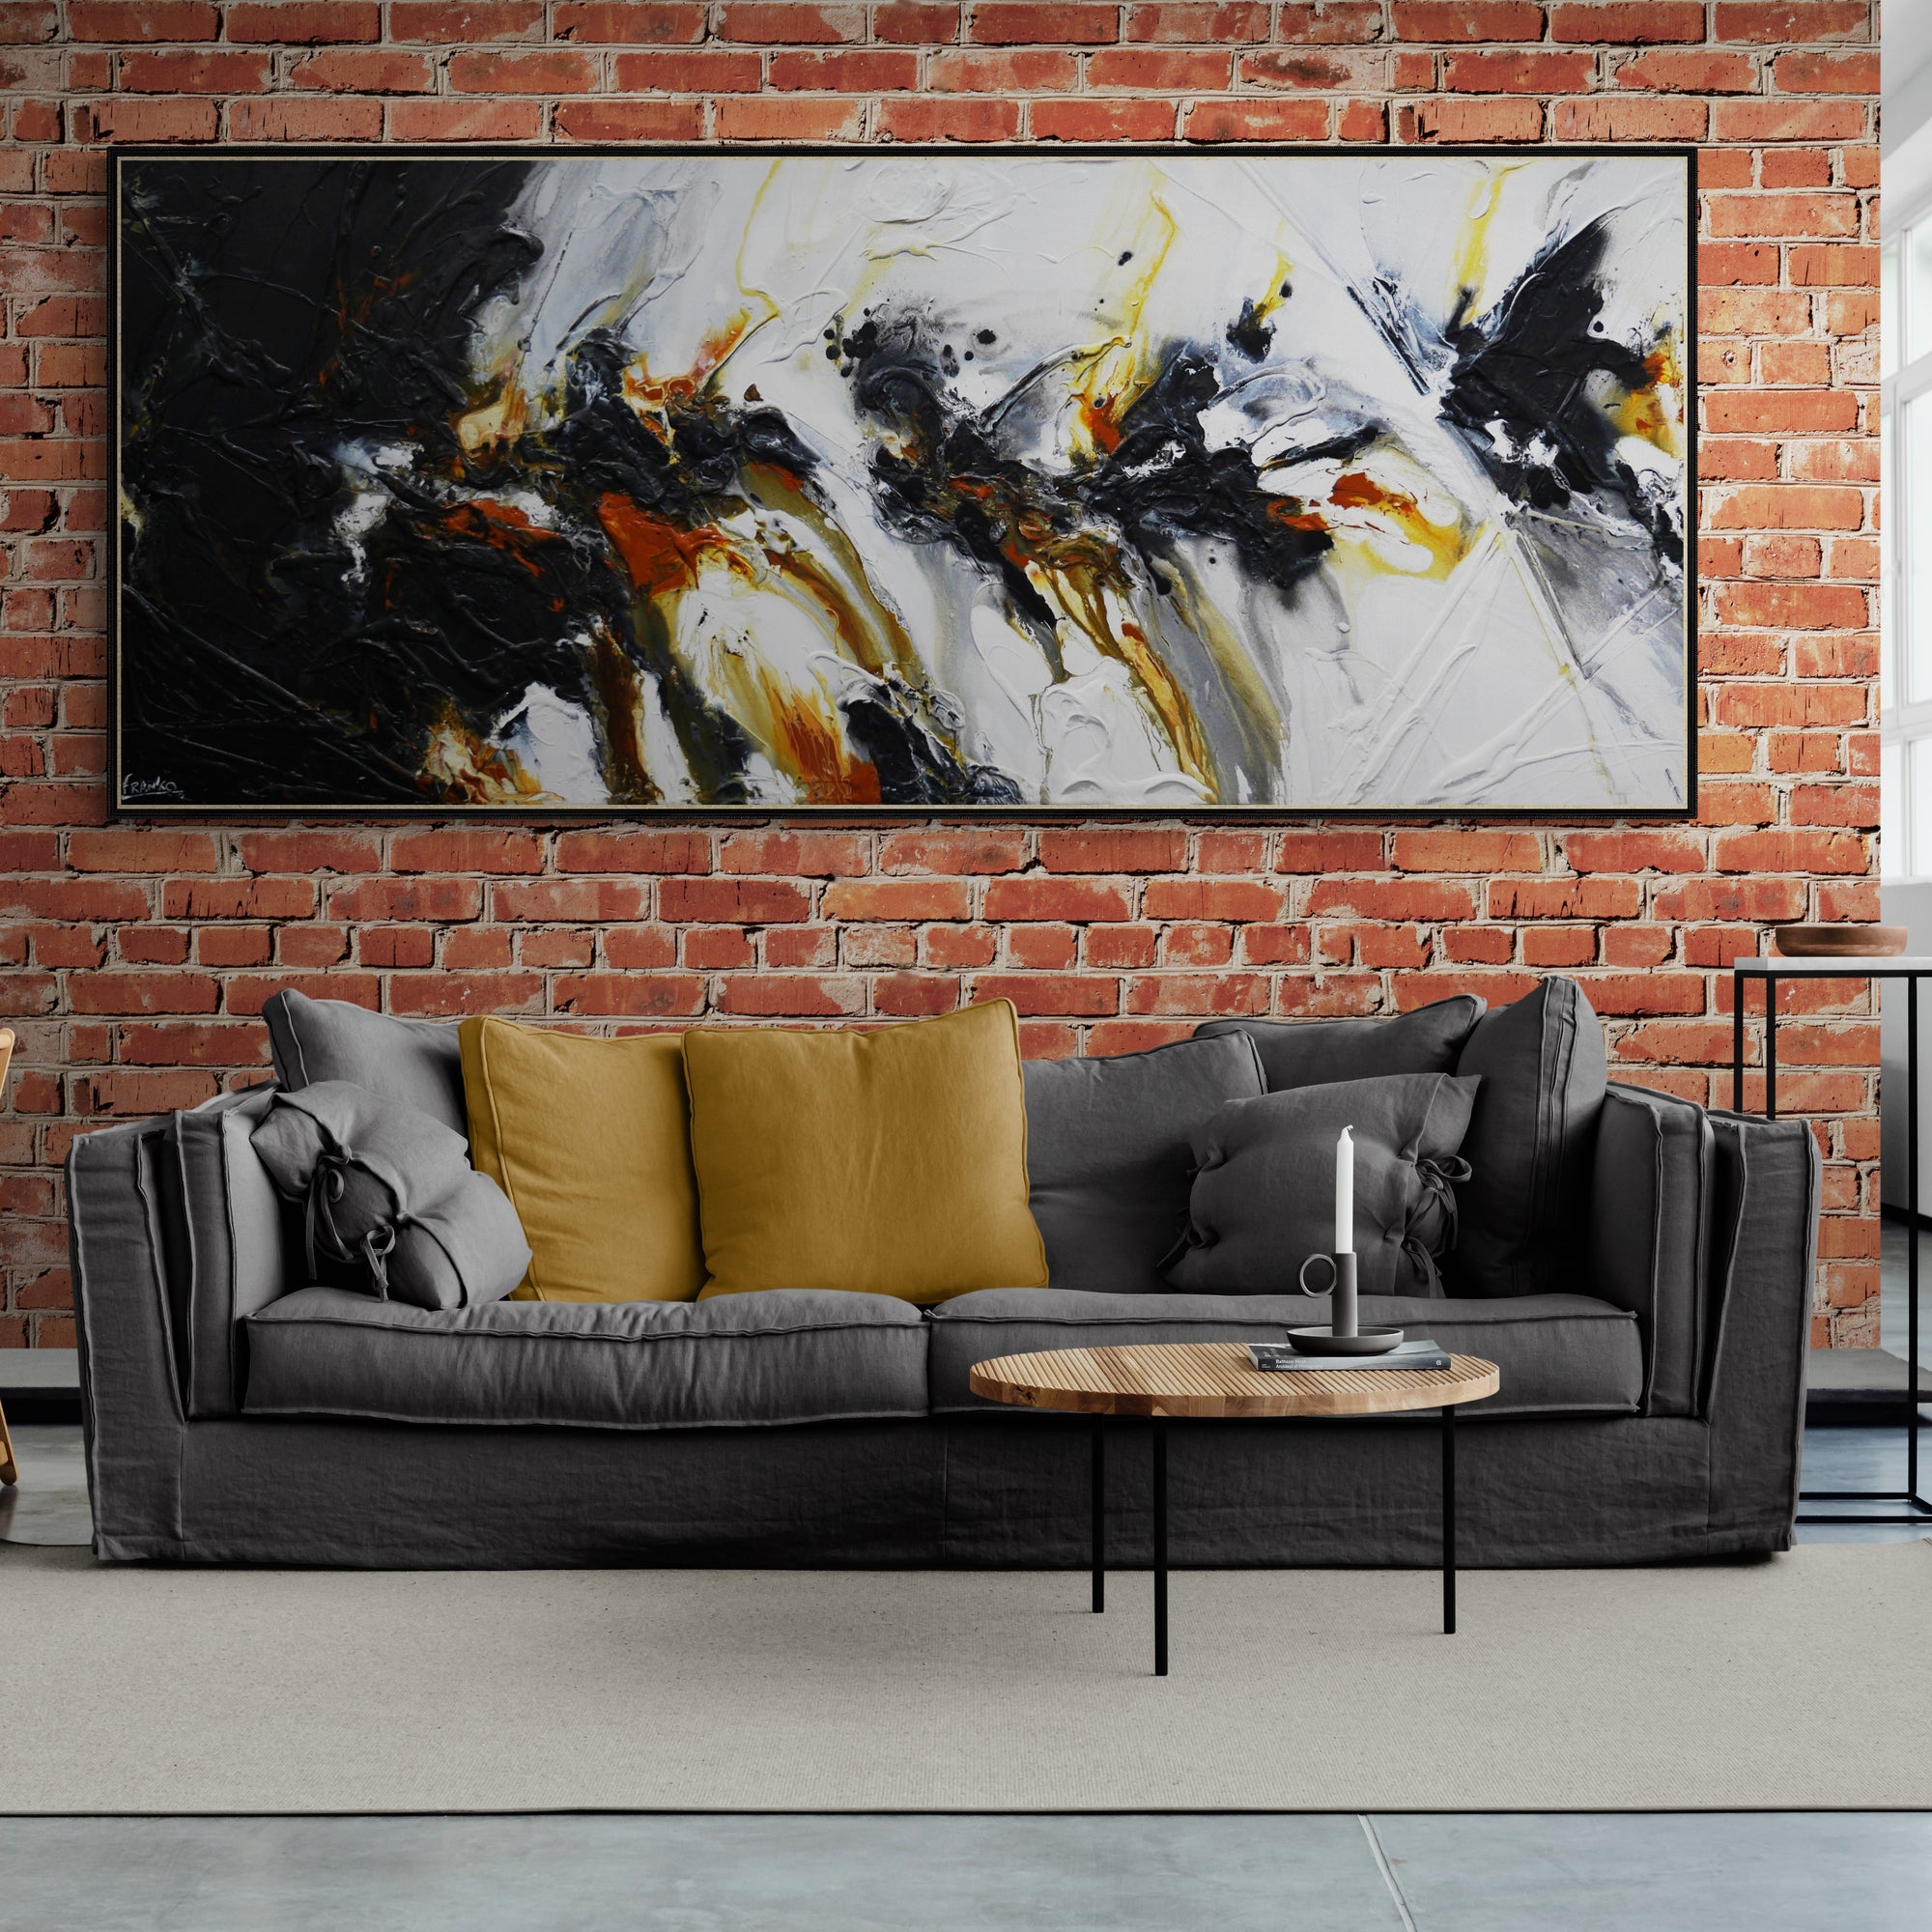 Sienna Steel 240cm x 100cm Textured Abstract Painting